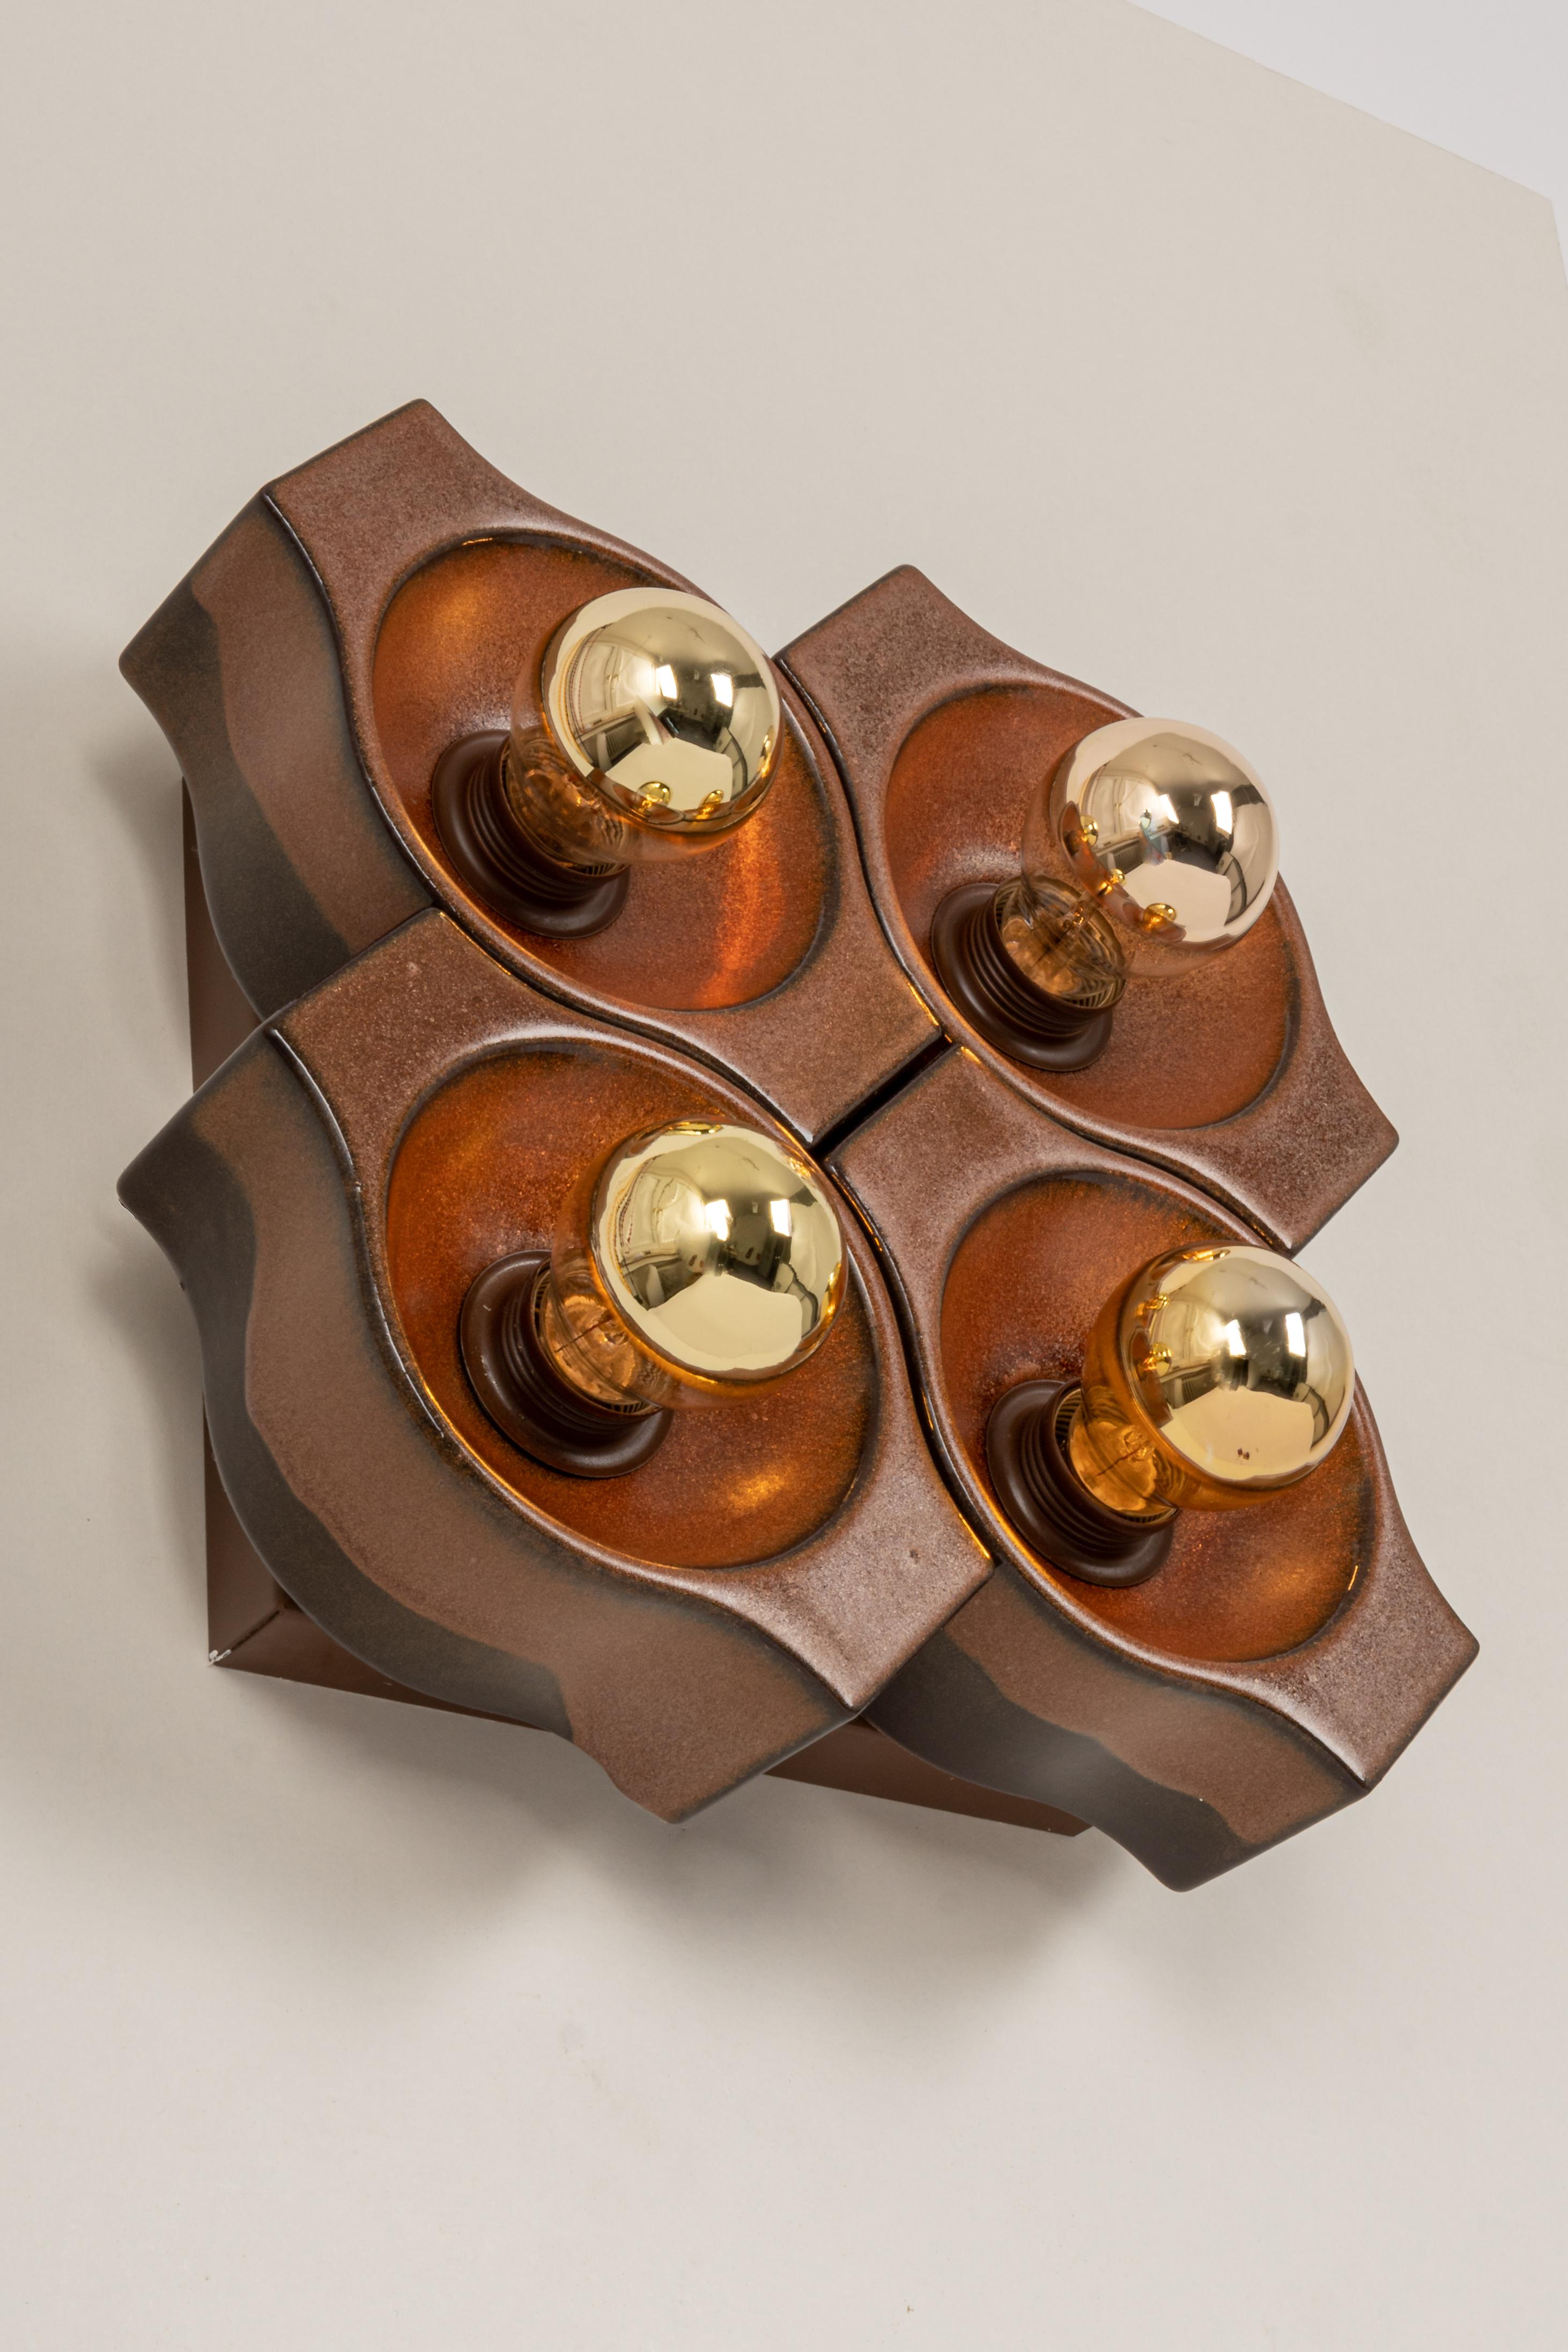 Set of 4 ceramic brown wall light Sputnik desiged by Cari Zalloni Germany, 1970s
Heavy quality and in very good condition. Cleaned, well-wired and ready to use. 
These wall lights can be only mounted as a set.

Each wall light requires 1 x E14